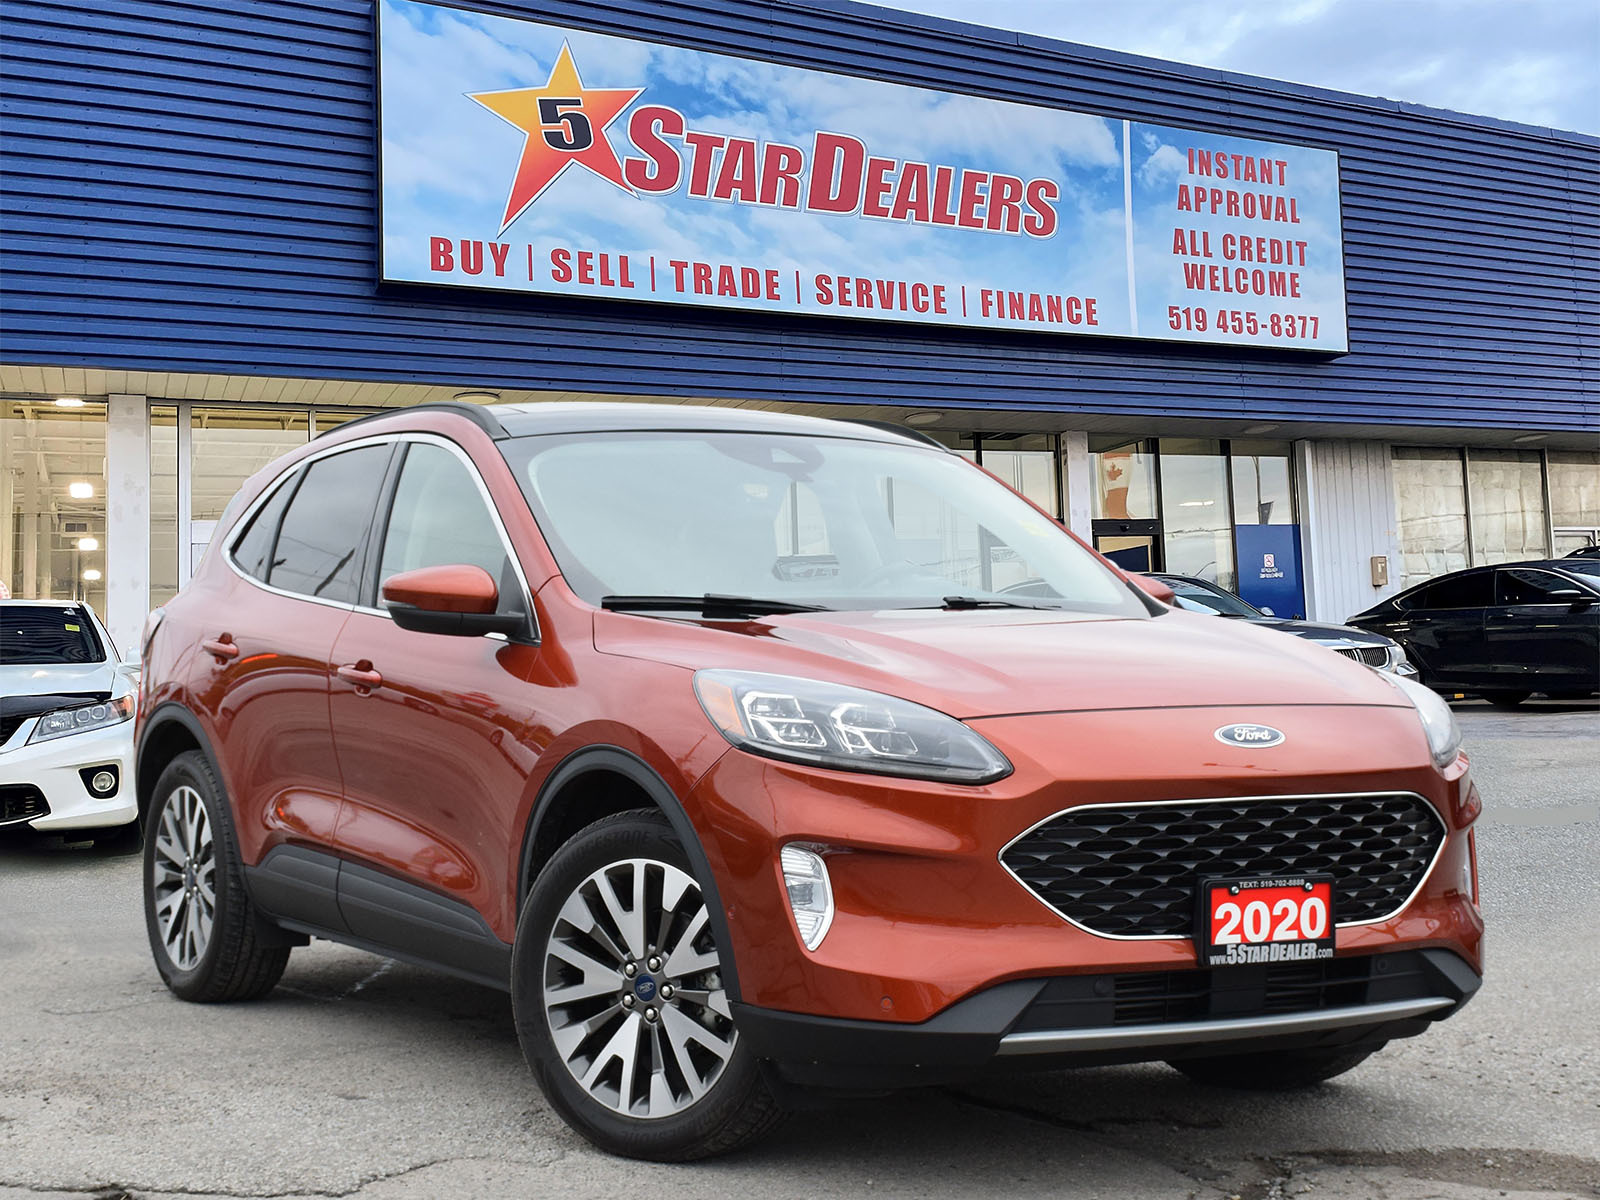 2020 Ford Escape NAV LEATHER PANO ROOF MINT! WE FINANCE ALL CREDIT!